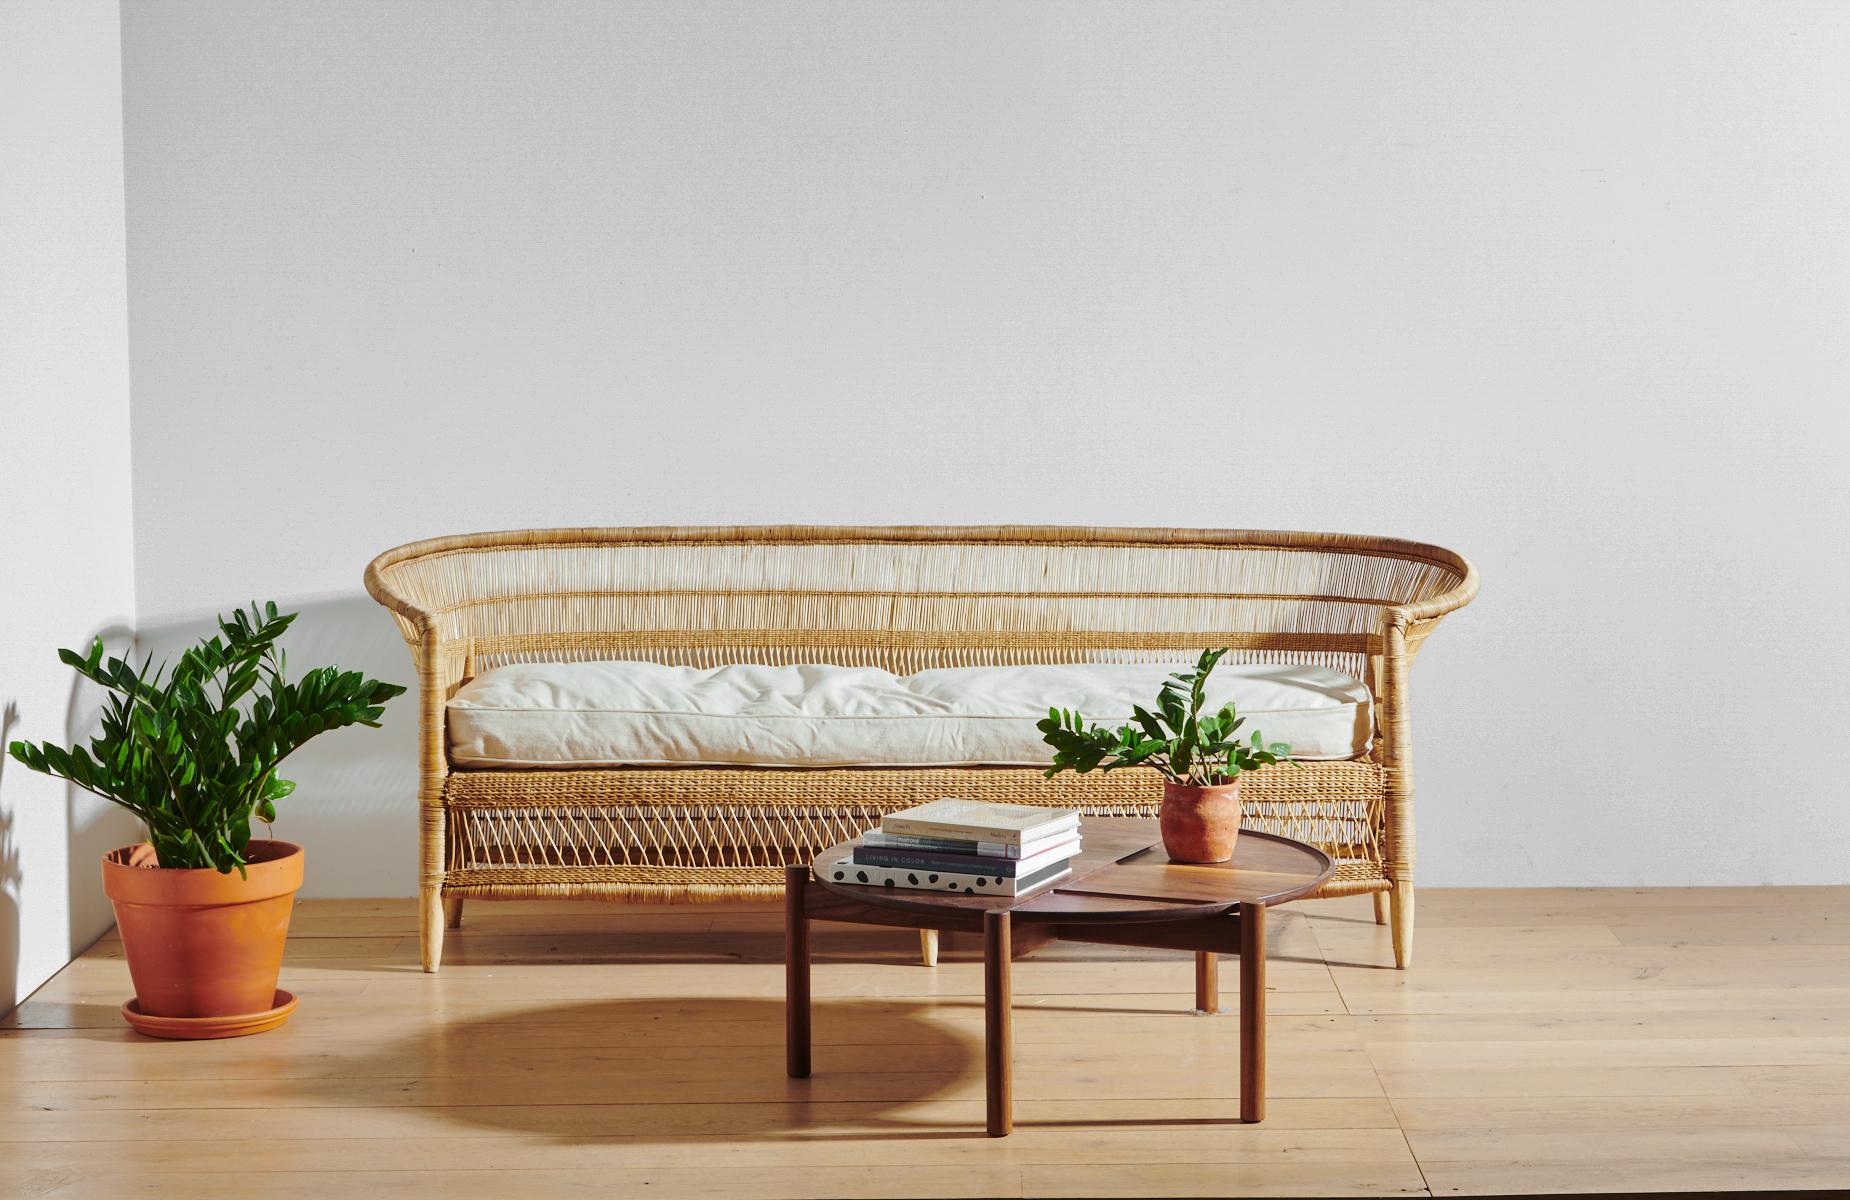 Hand-Woven Handwoven Malawi Cane Sofa in Traditional Weave with White Linen Cushion - 83